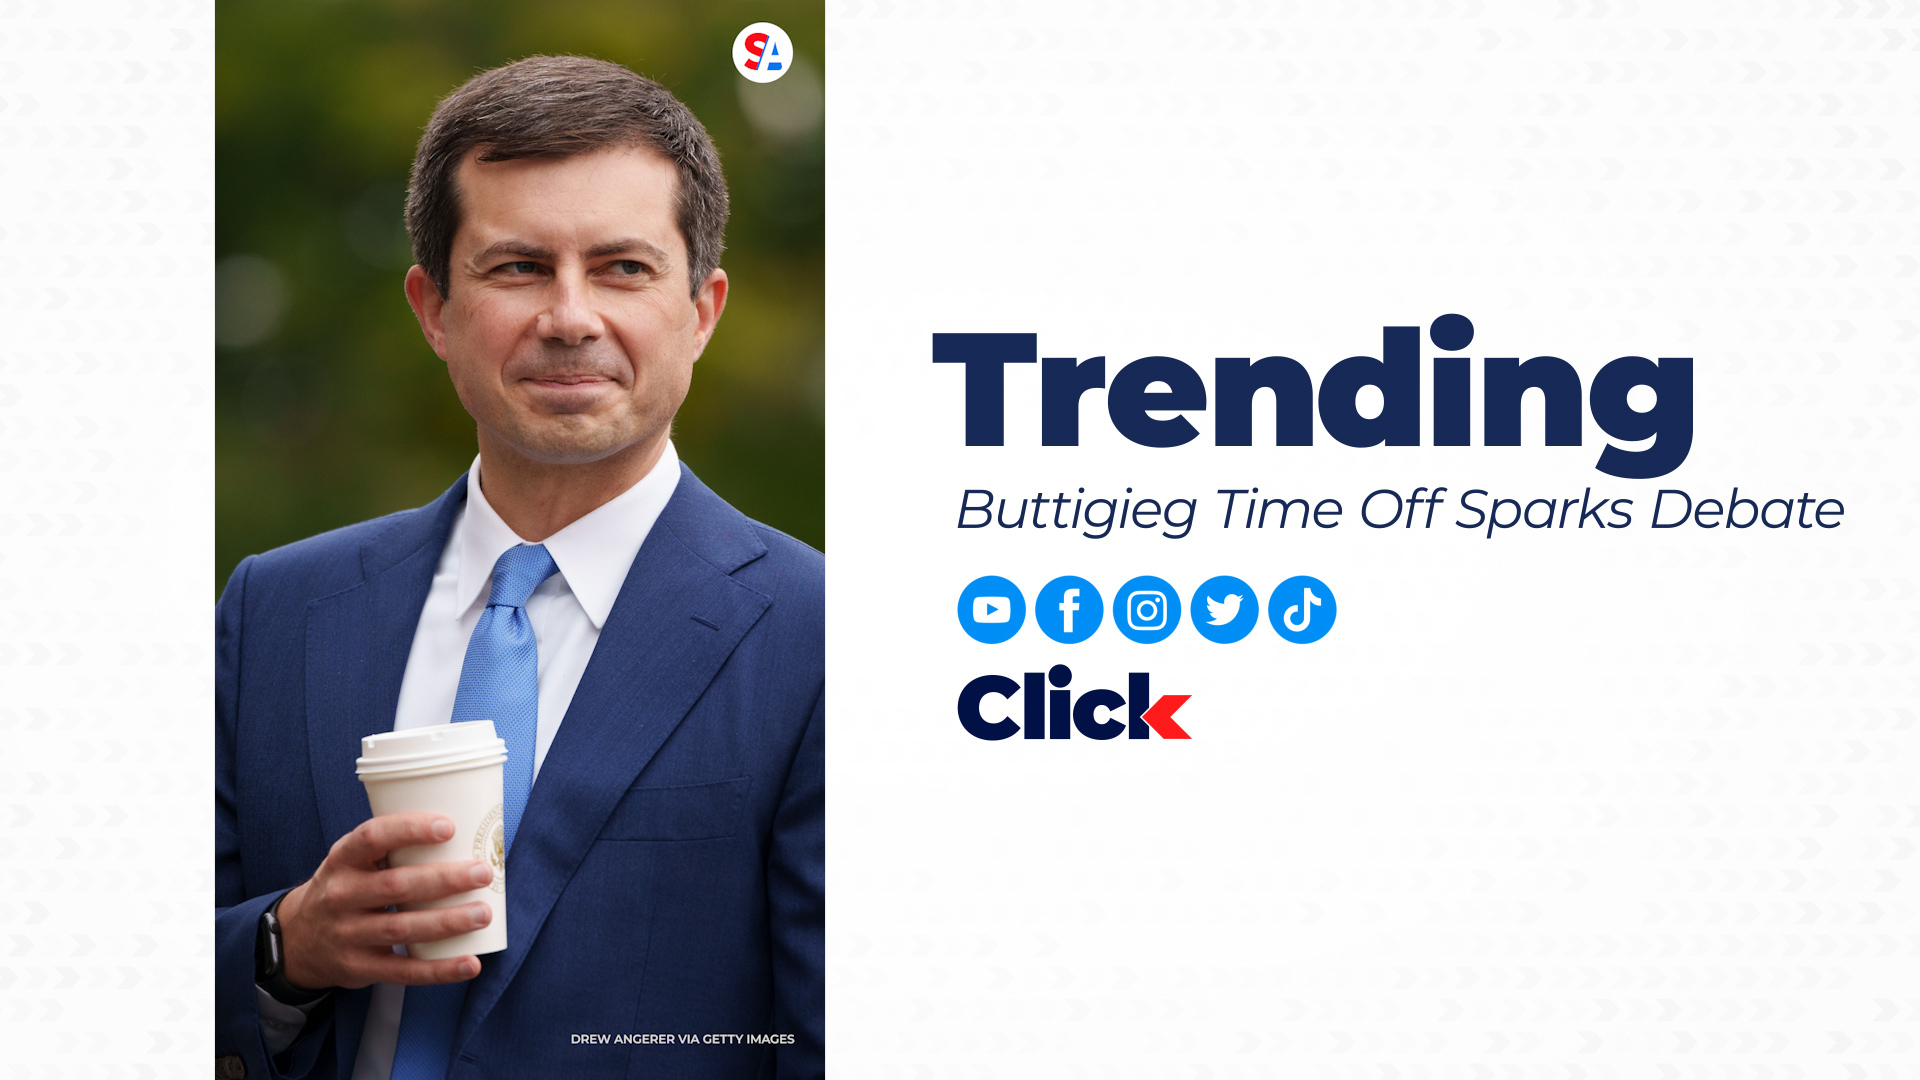 A debate over paternity leave took center stage after Transportation Secretary Pete Buttigieg shared he took time off once his twins were born.